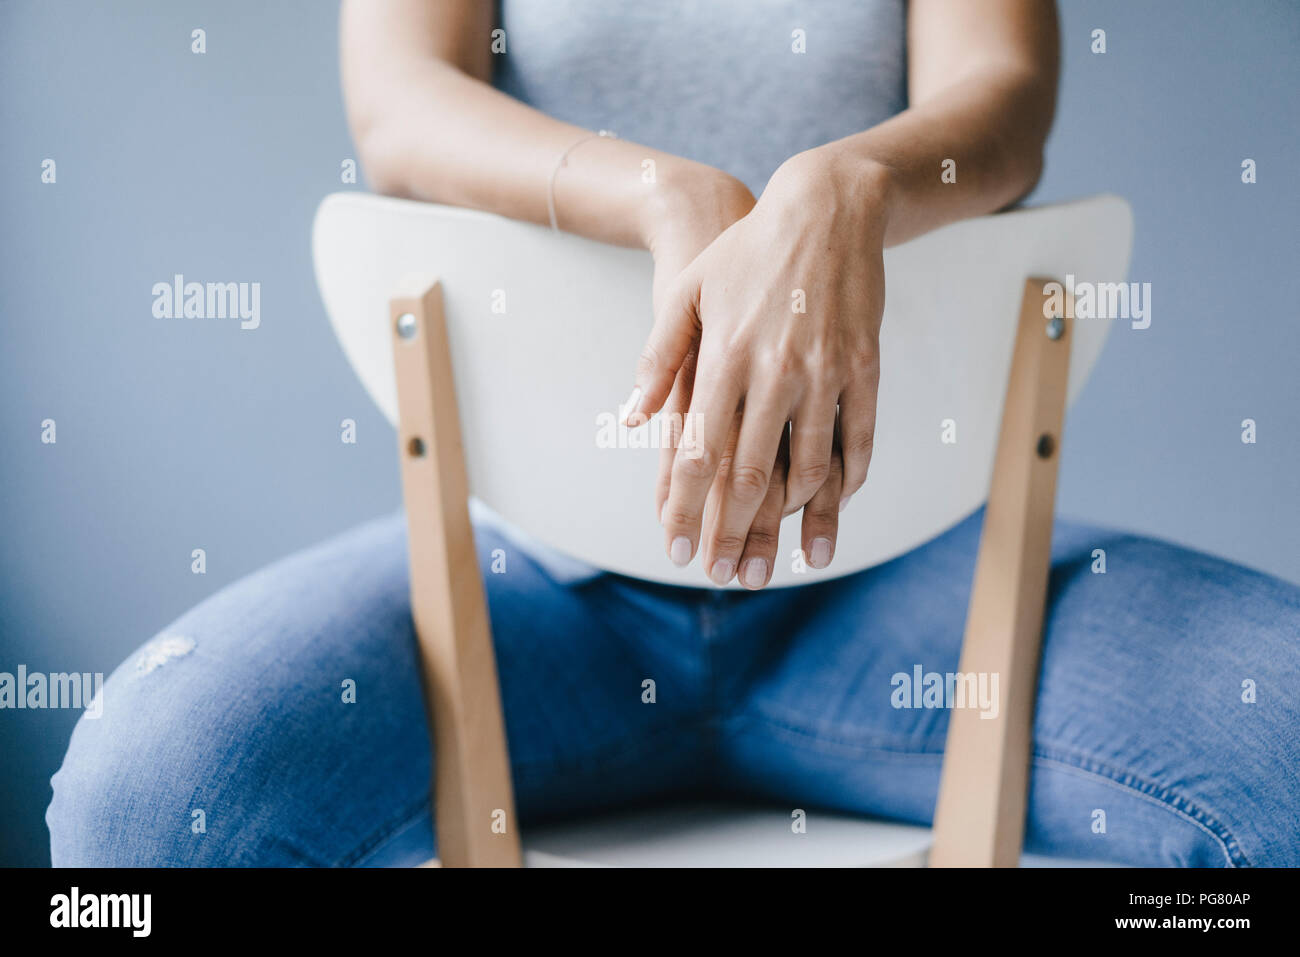 Hands of a woman sitting on a chair Stock Photo